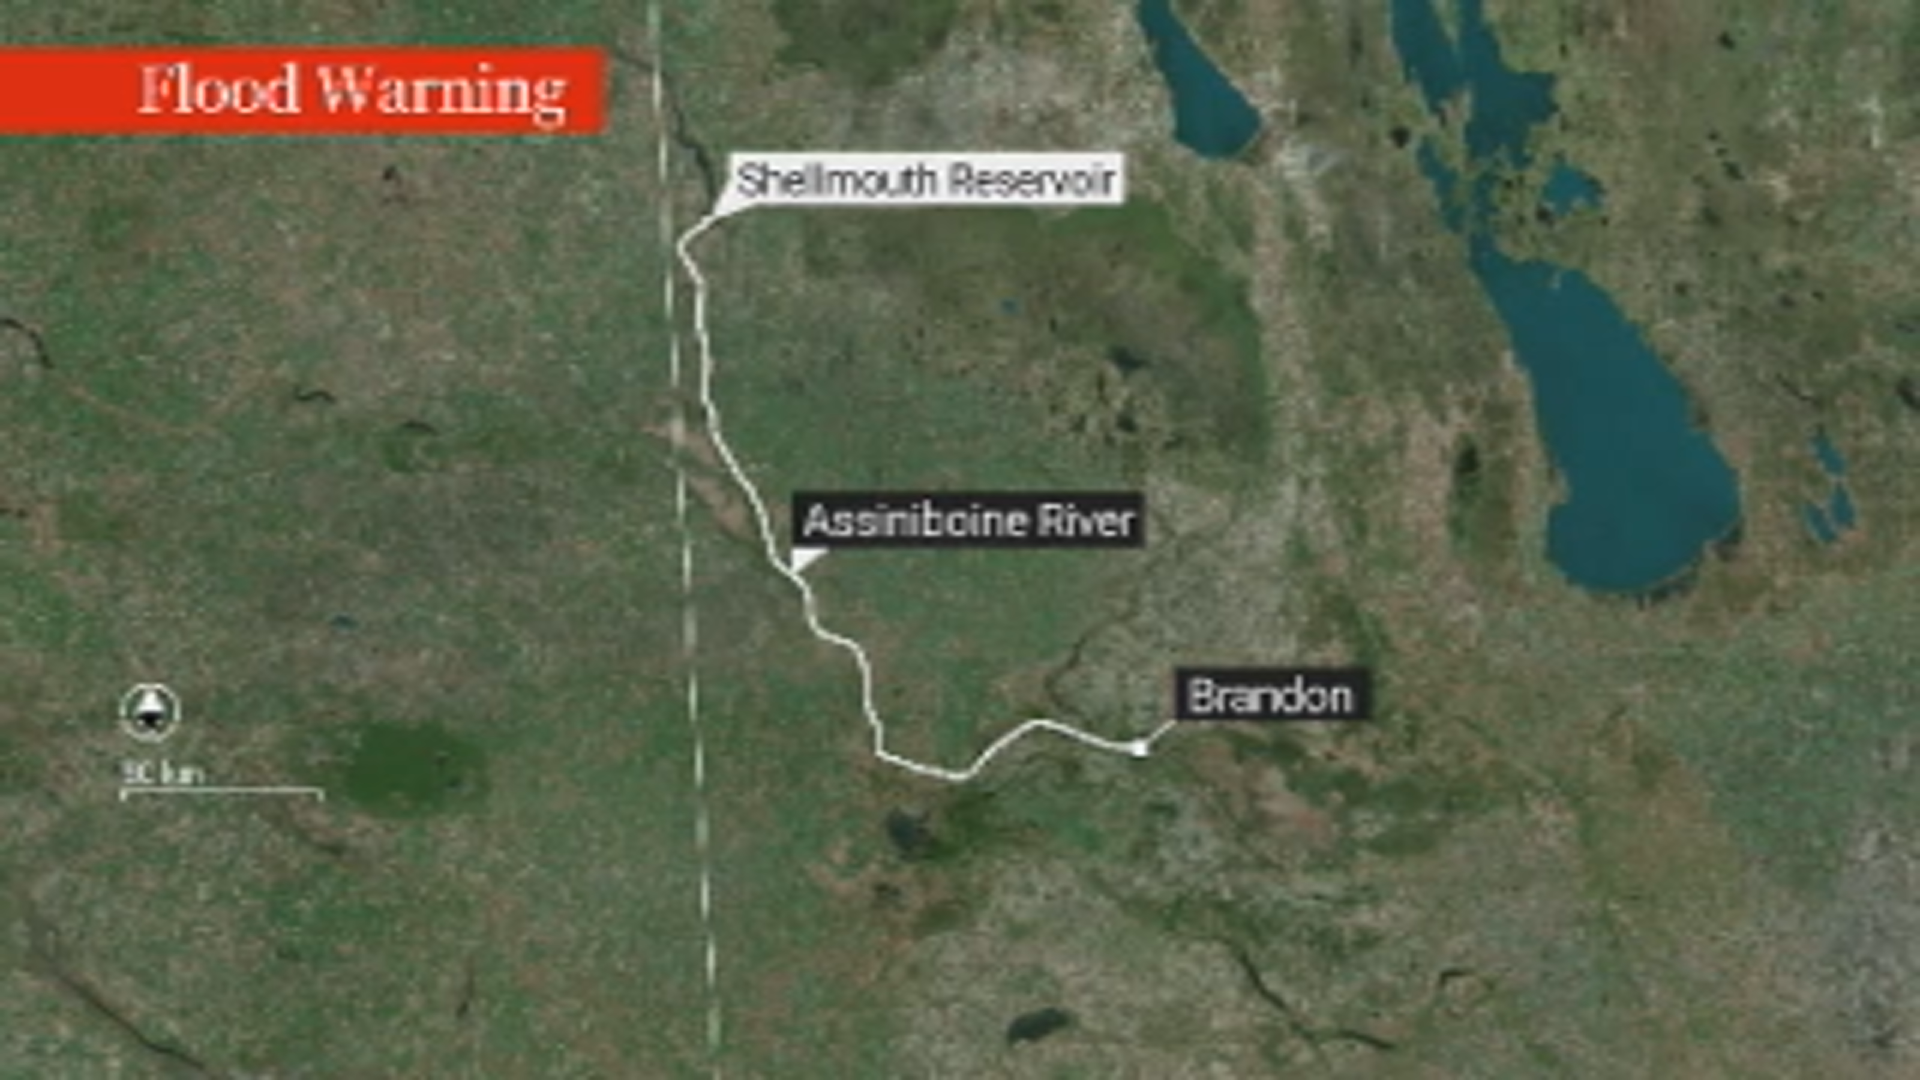 Province issues flood warning for Assiniboine River in Western Manitoba